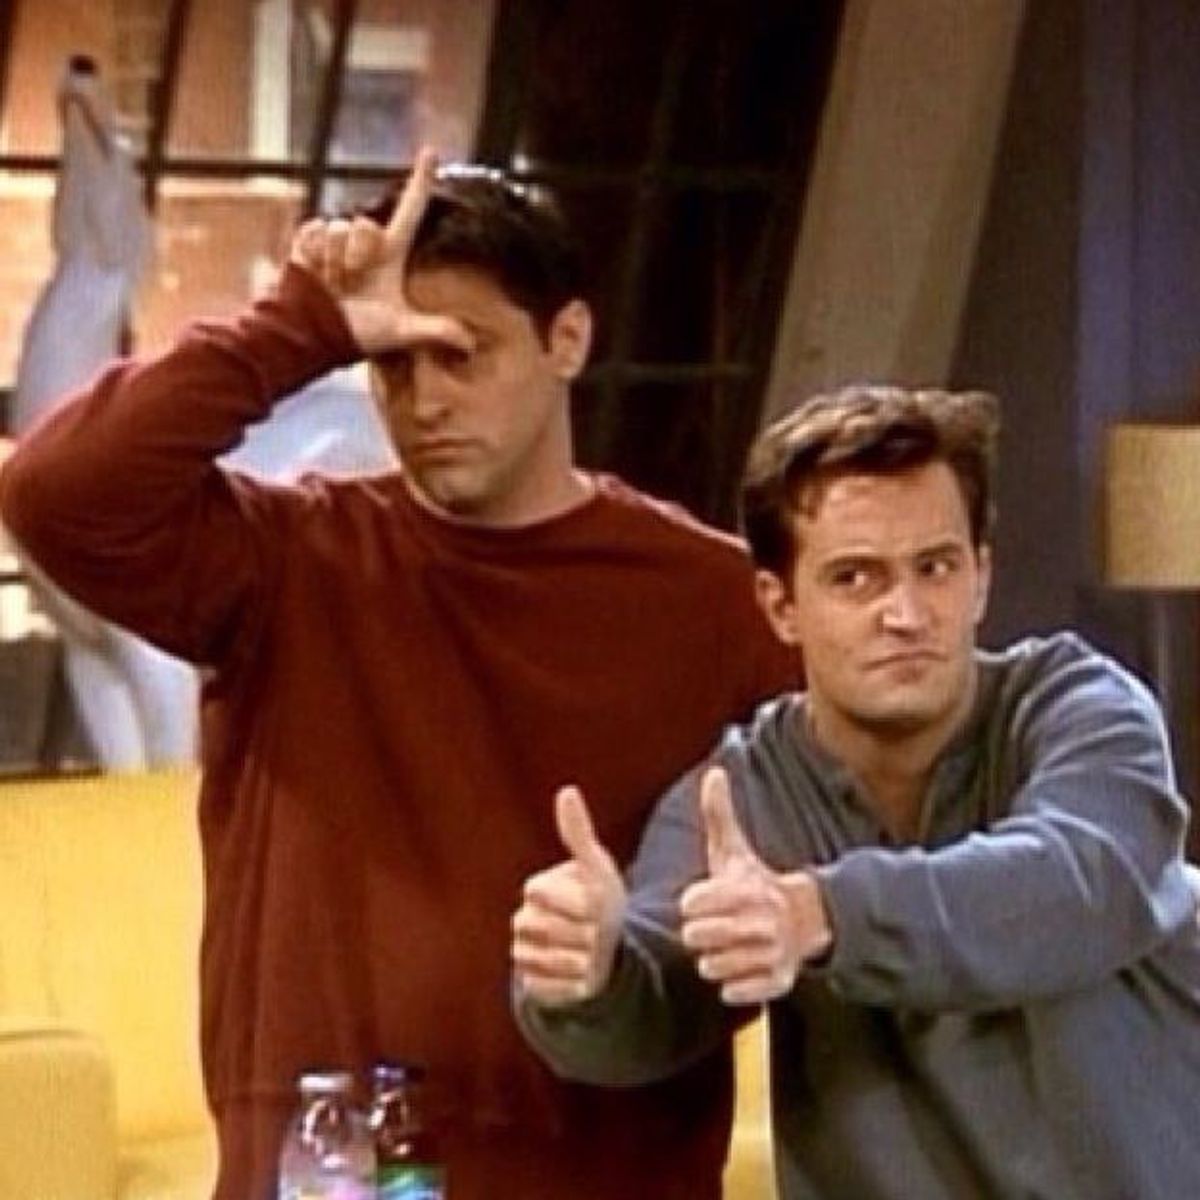 The 9 Stages OF Finding A Summer Internship, As Told By 'Friends'